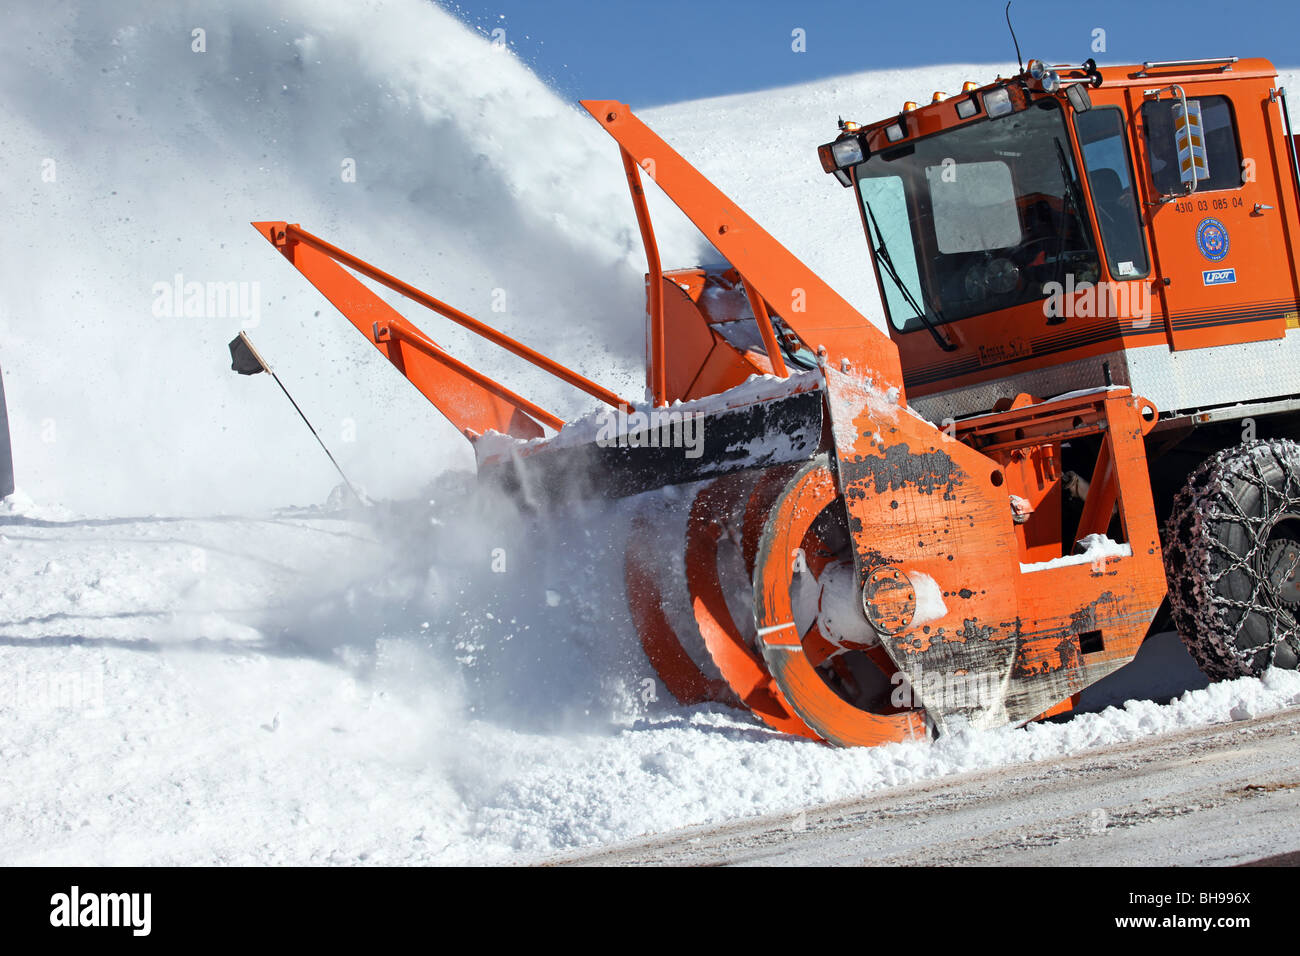 Snow blower removing snow from mountain road. Large vehicle with